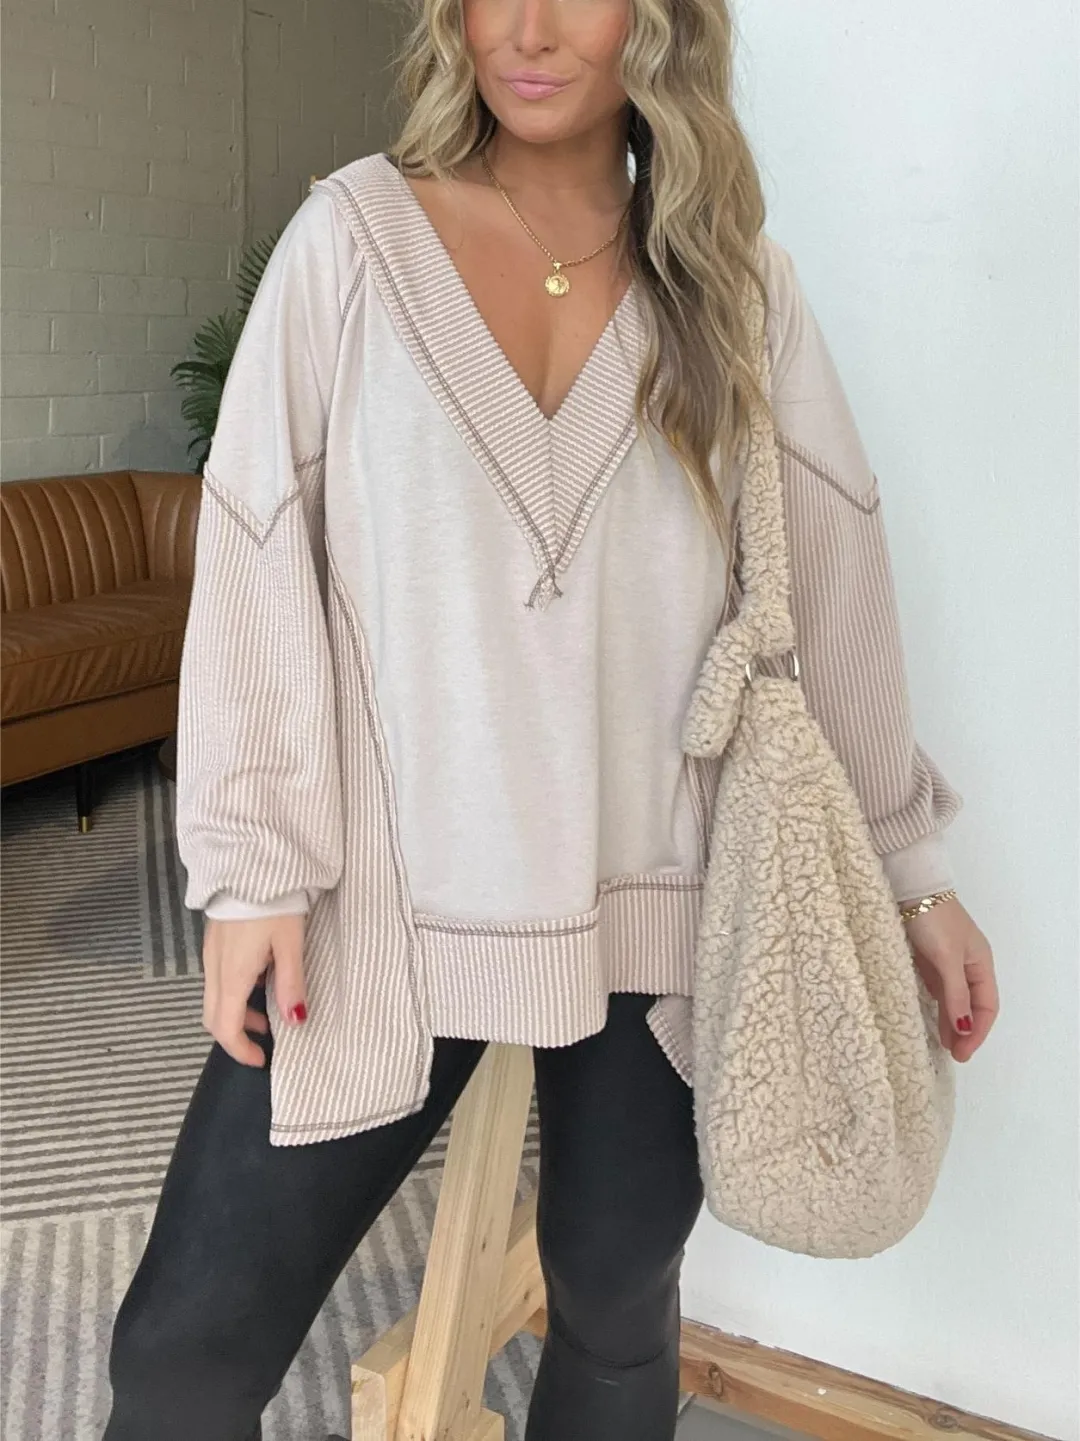 Women's V-Neck Loose Long Sleeve Top (Buy 2 Free Shipping)